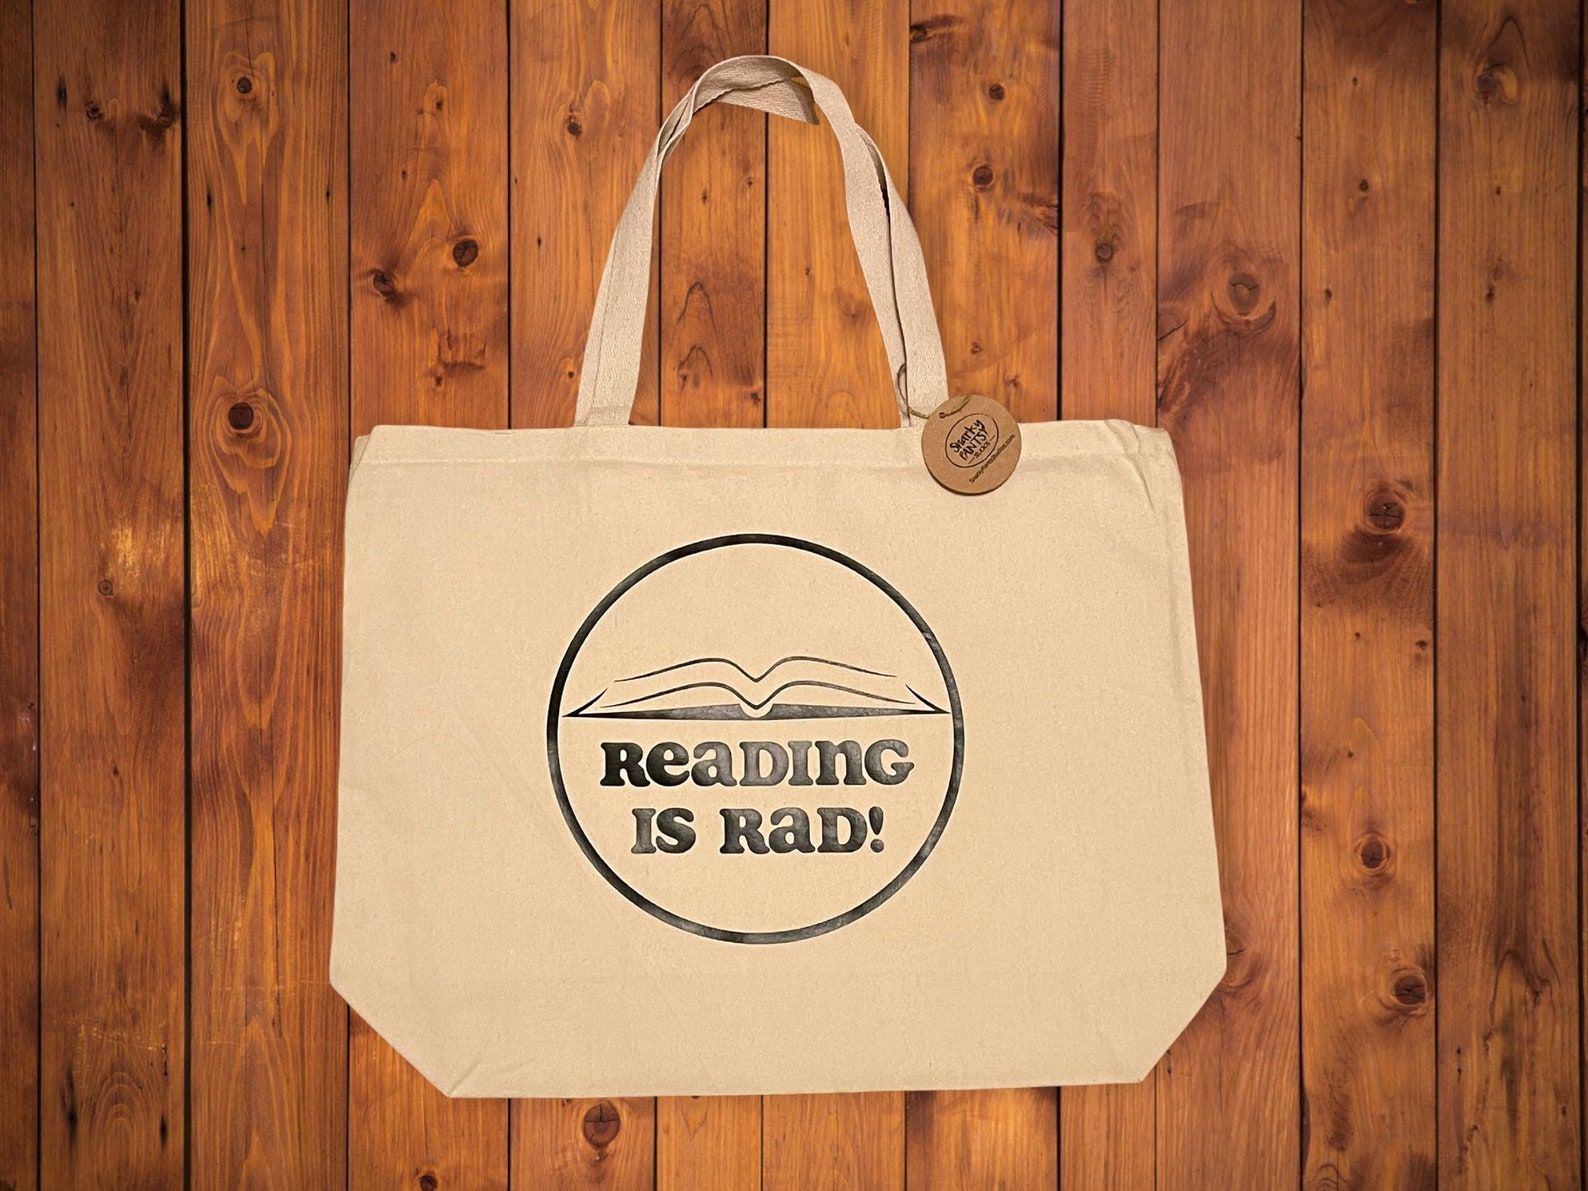 Image of a large canvas tote on a wood background. The center of the tote has a black image of an open book inside a circle. The text beneath the book reads "Reading Is Rad!"